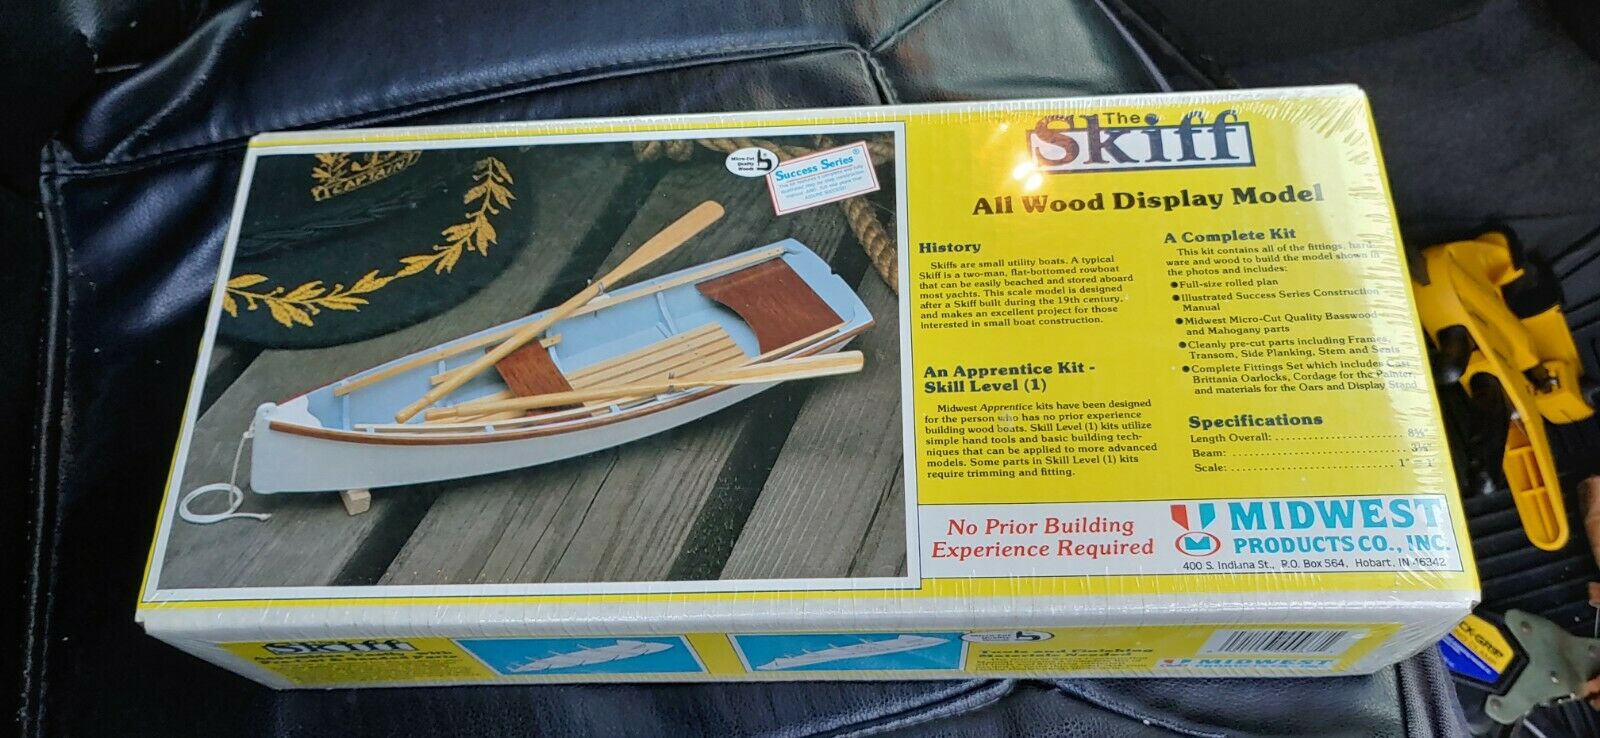 Midwest Products The Skiff 1/12 Scale All Wood Display Model Boat Kit 967 New